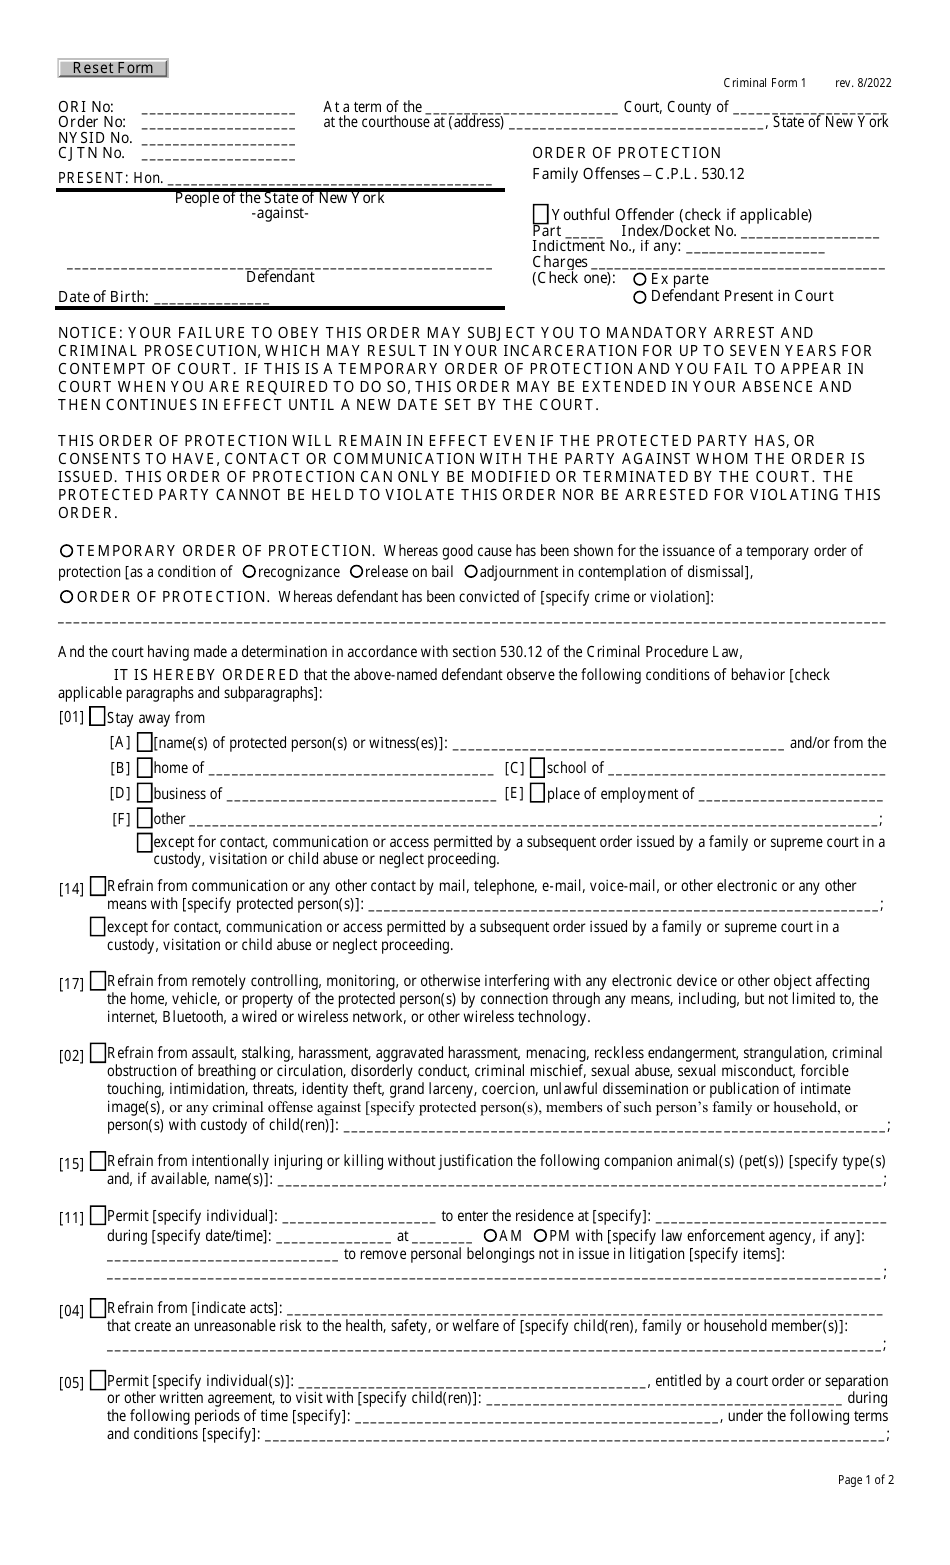 Criminal Form 1 Order of Protection - Family Offenses - New York, Page 1